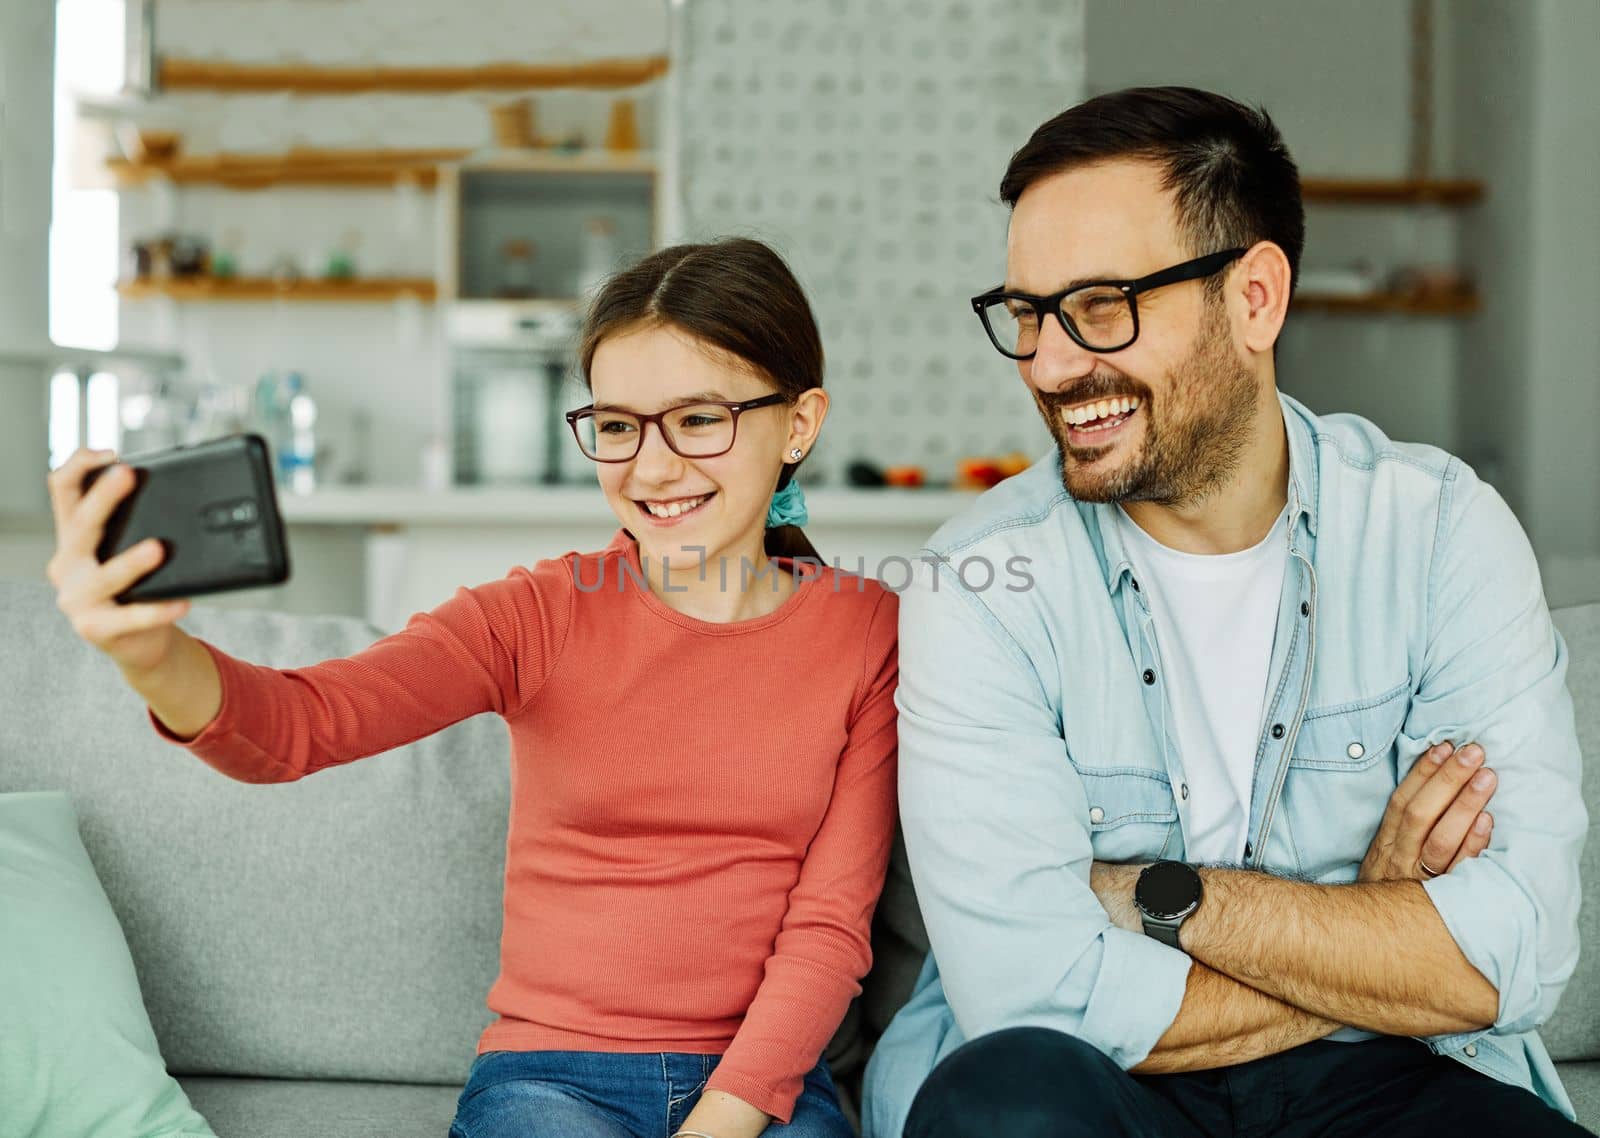 child daughter girl family happy father selfie camera phone smartphone mobile having fun together girl smiling home bonding love by Picsfive